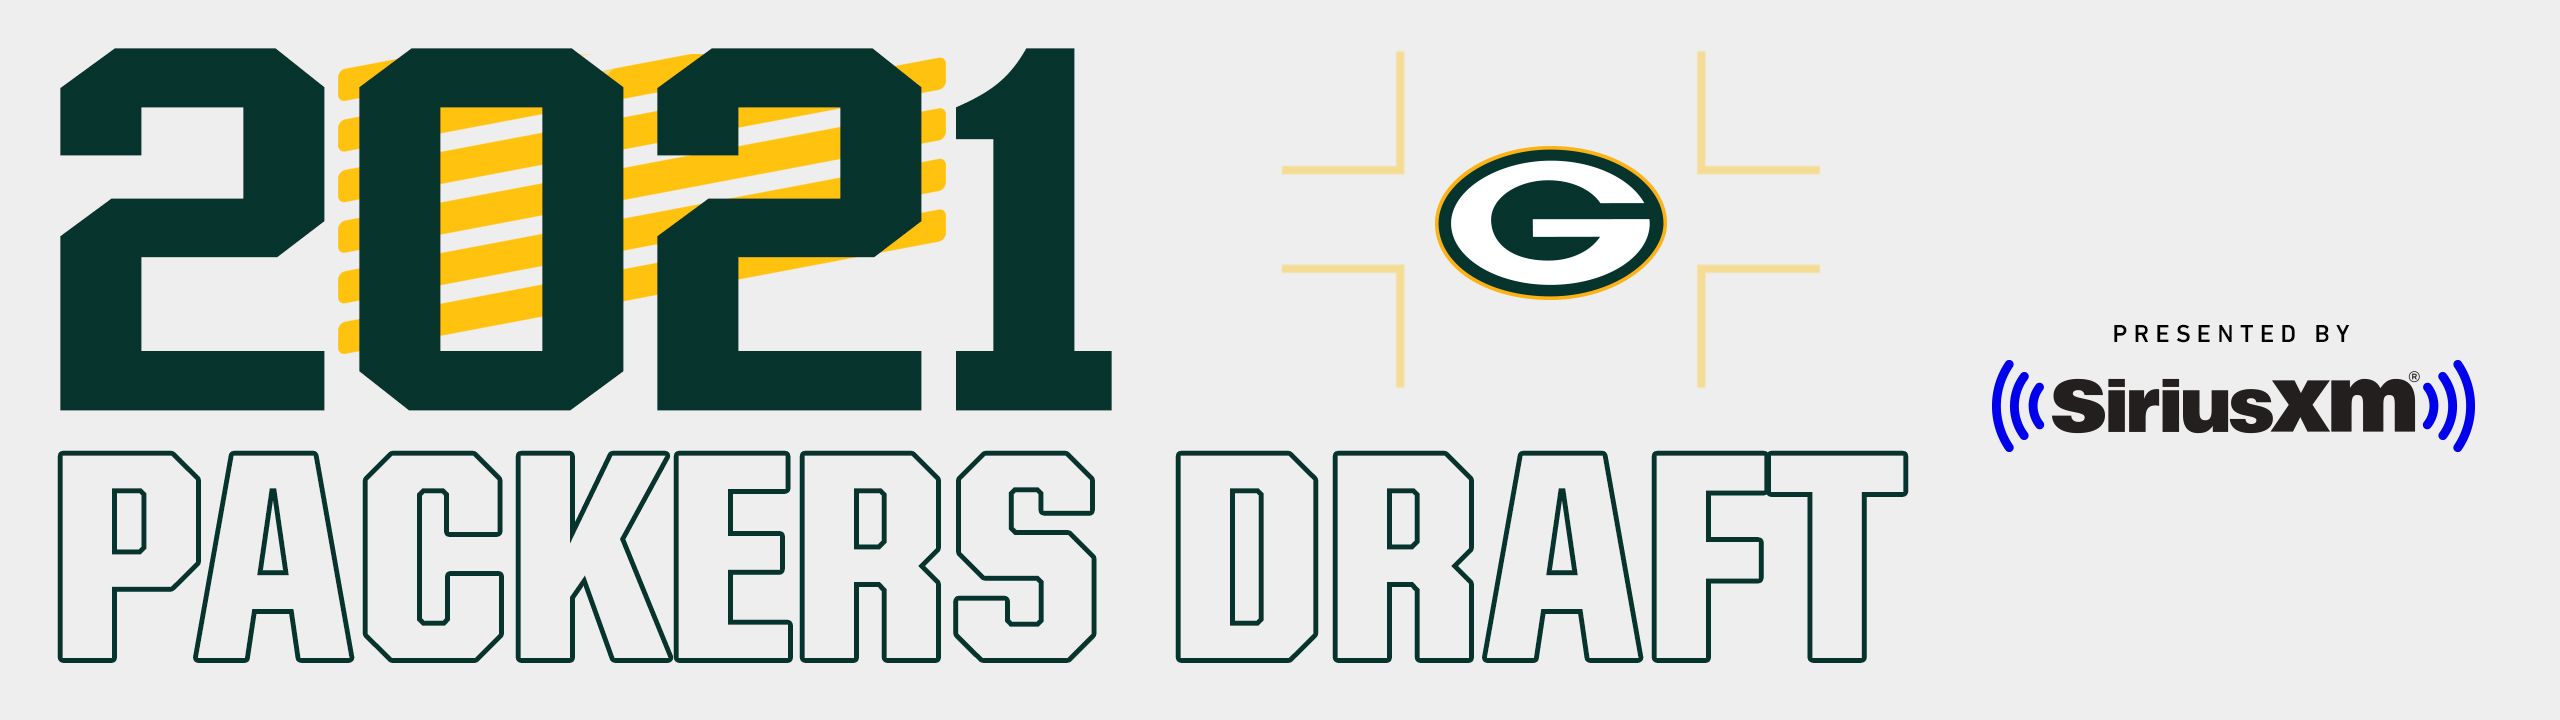 Packers 21 Nfl Draft Tracker Green Bay Packers Packers Com